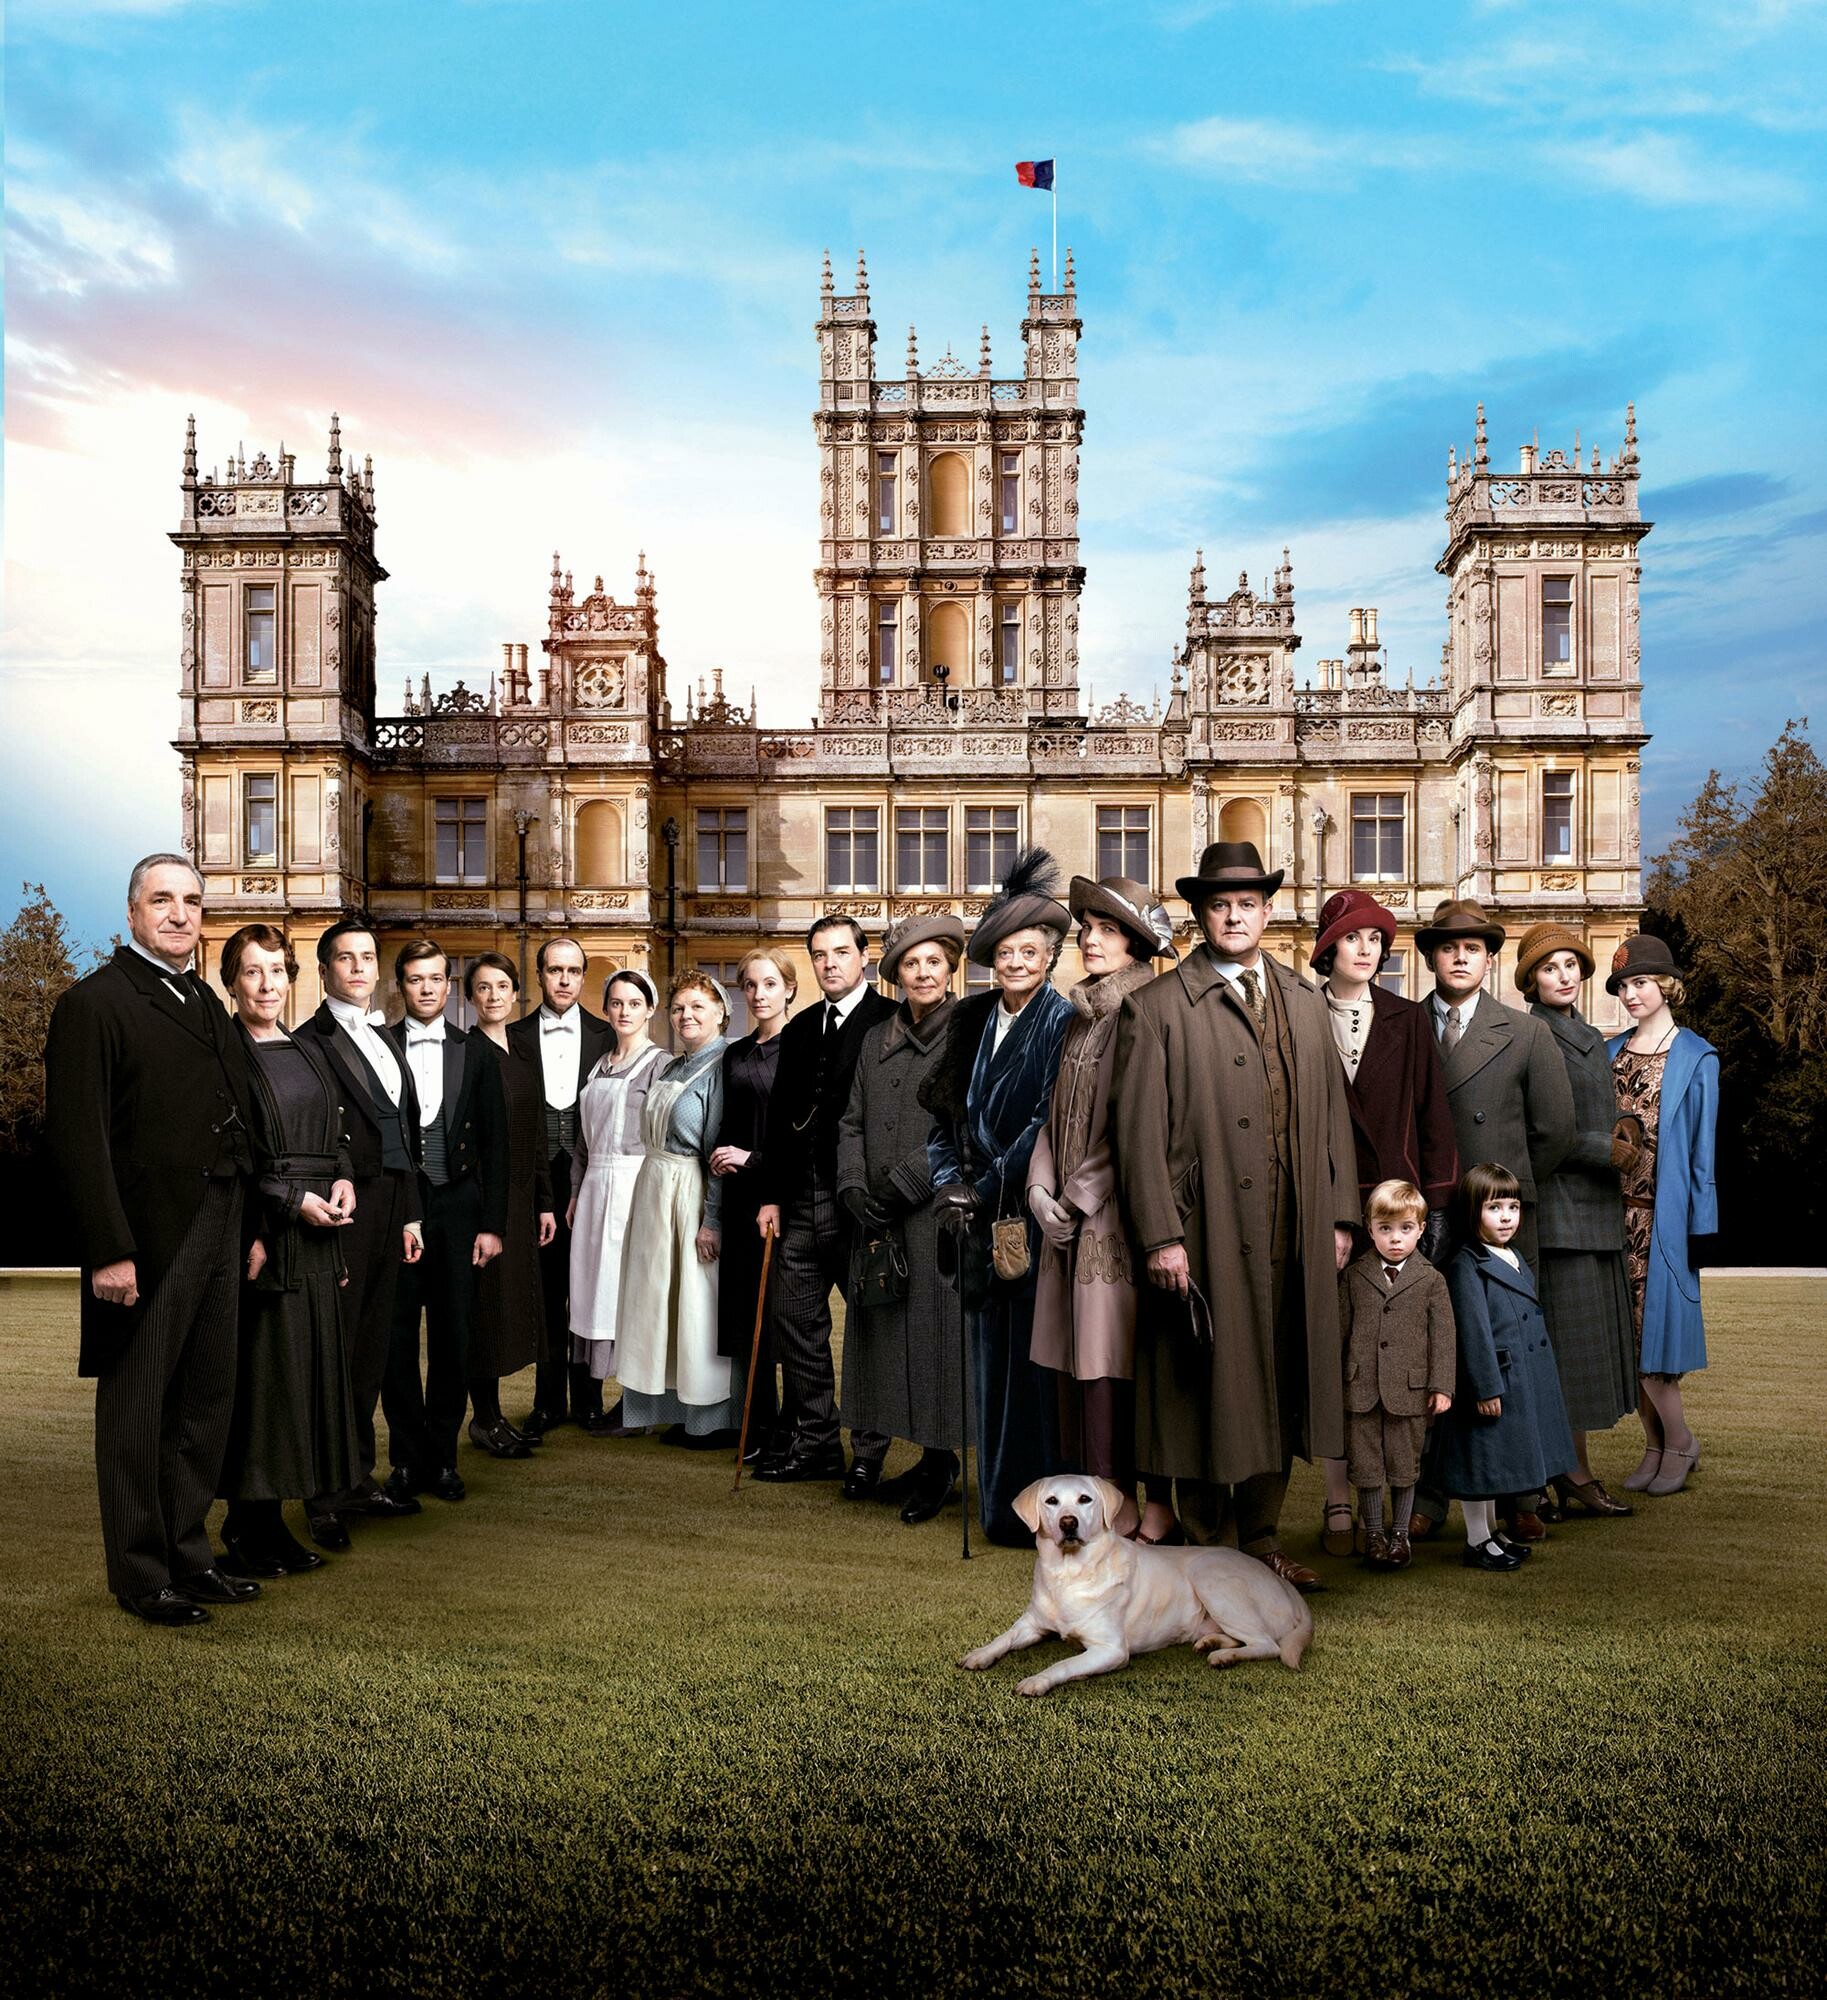 Downton Abbey: The most watched television series on both ITV and PBS at the time. 1830x2000 HD Background.